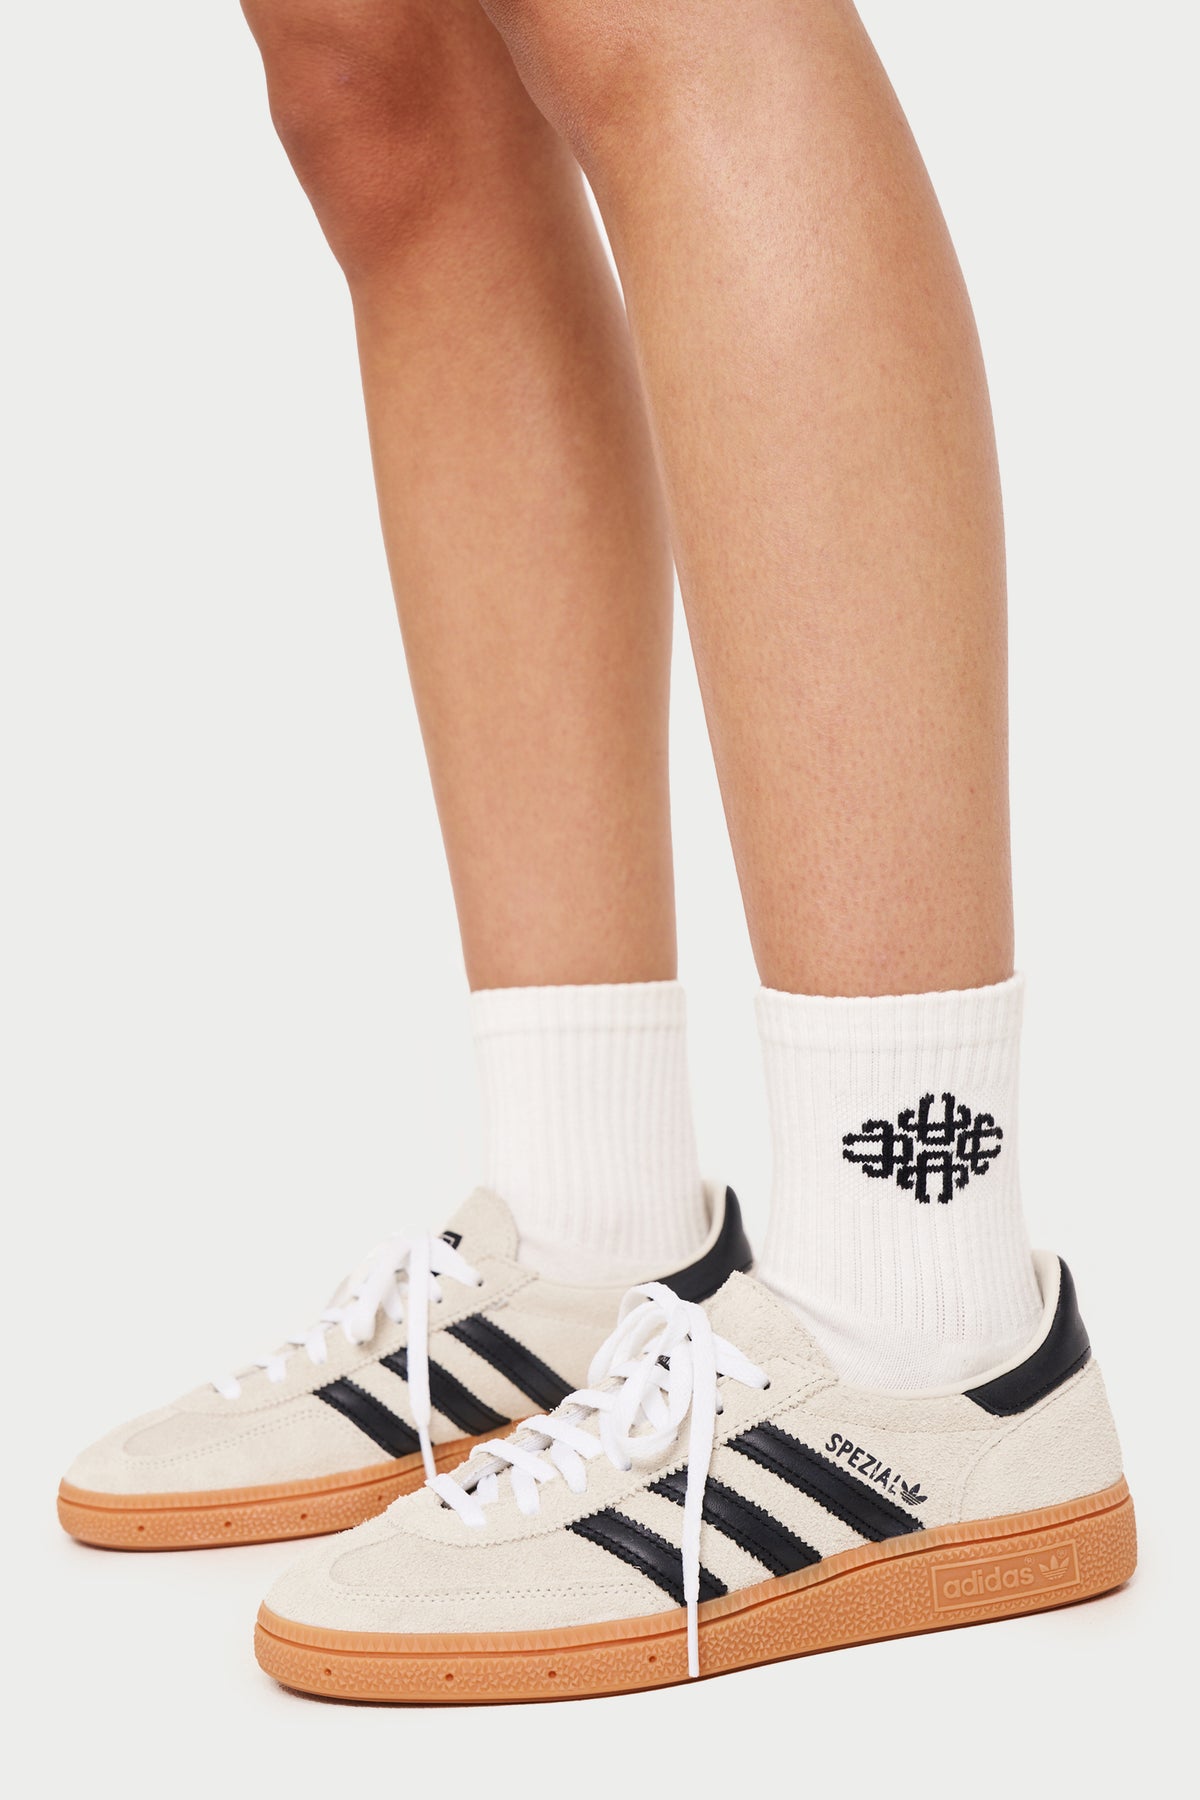 EMBLEM SPORT SOCK - WHITE – The Couture Club